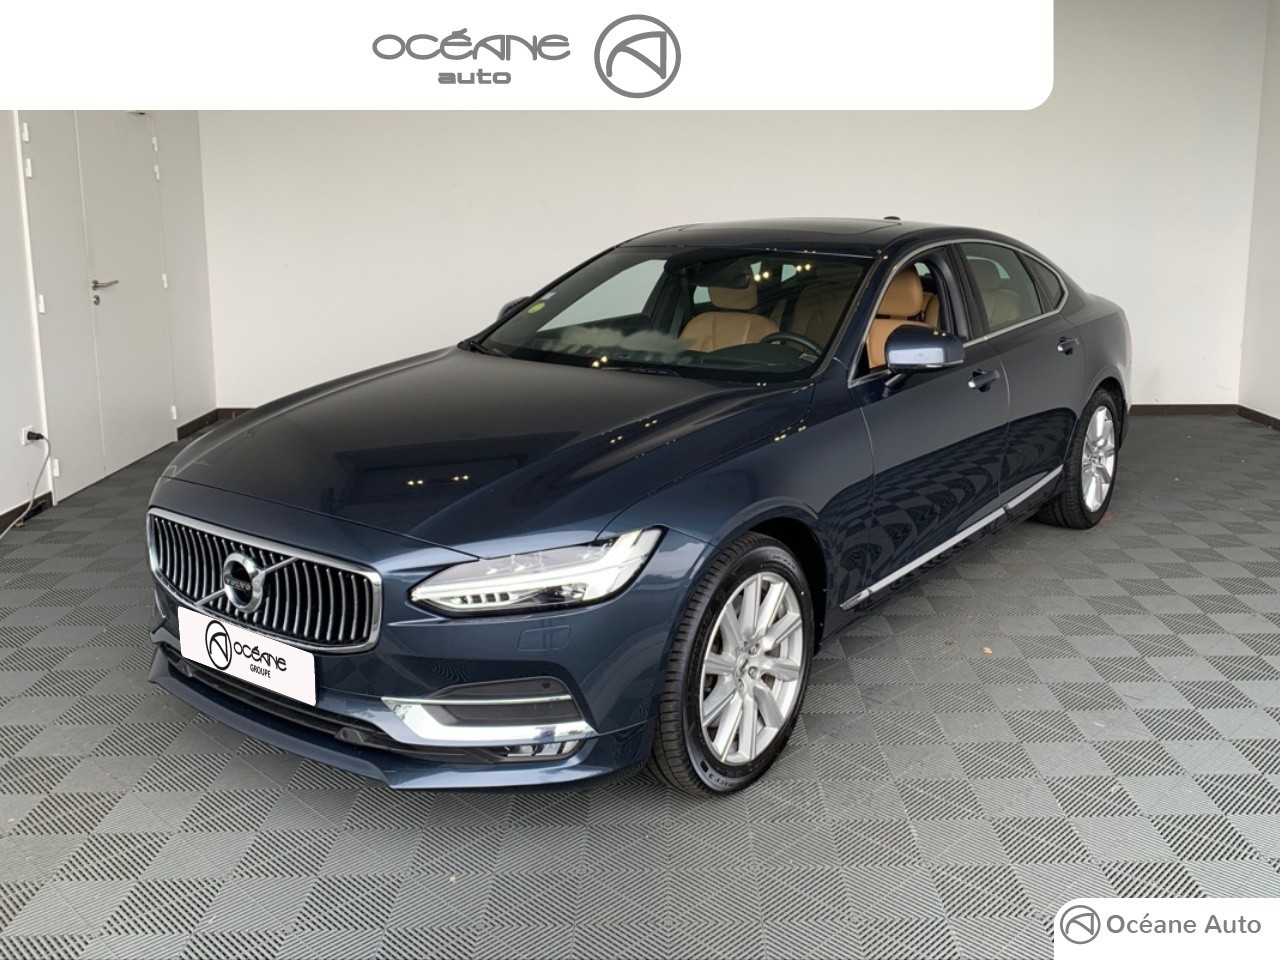 VOLVO S90 S90 D5 AWD 235 ch Geartronic 8 - Véhicule Occasion Océane Auto